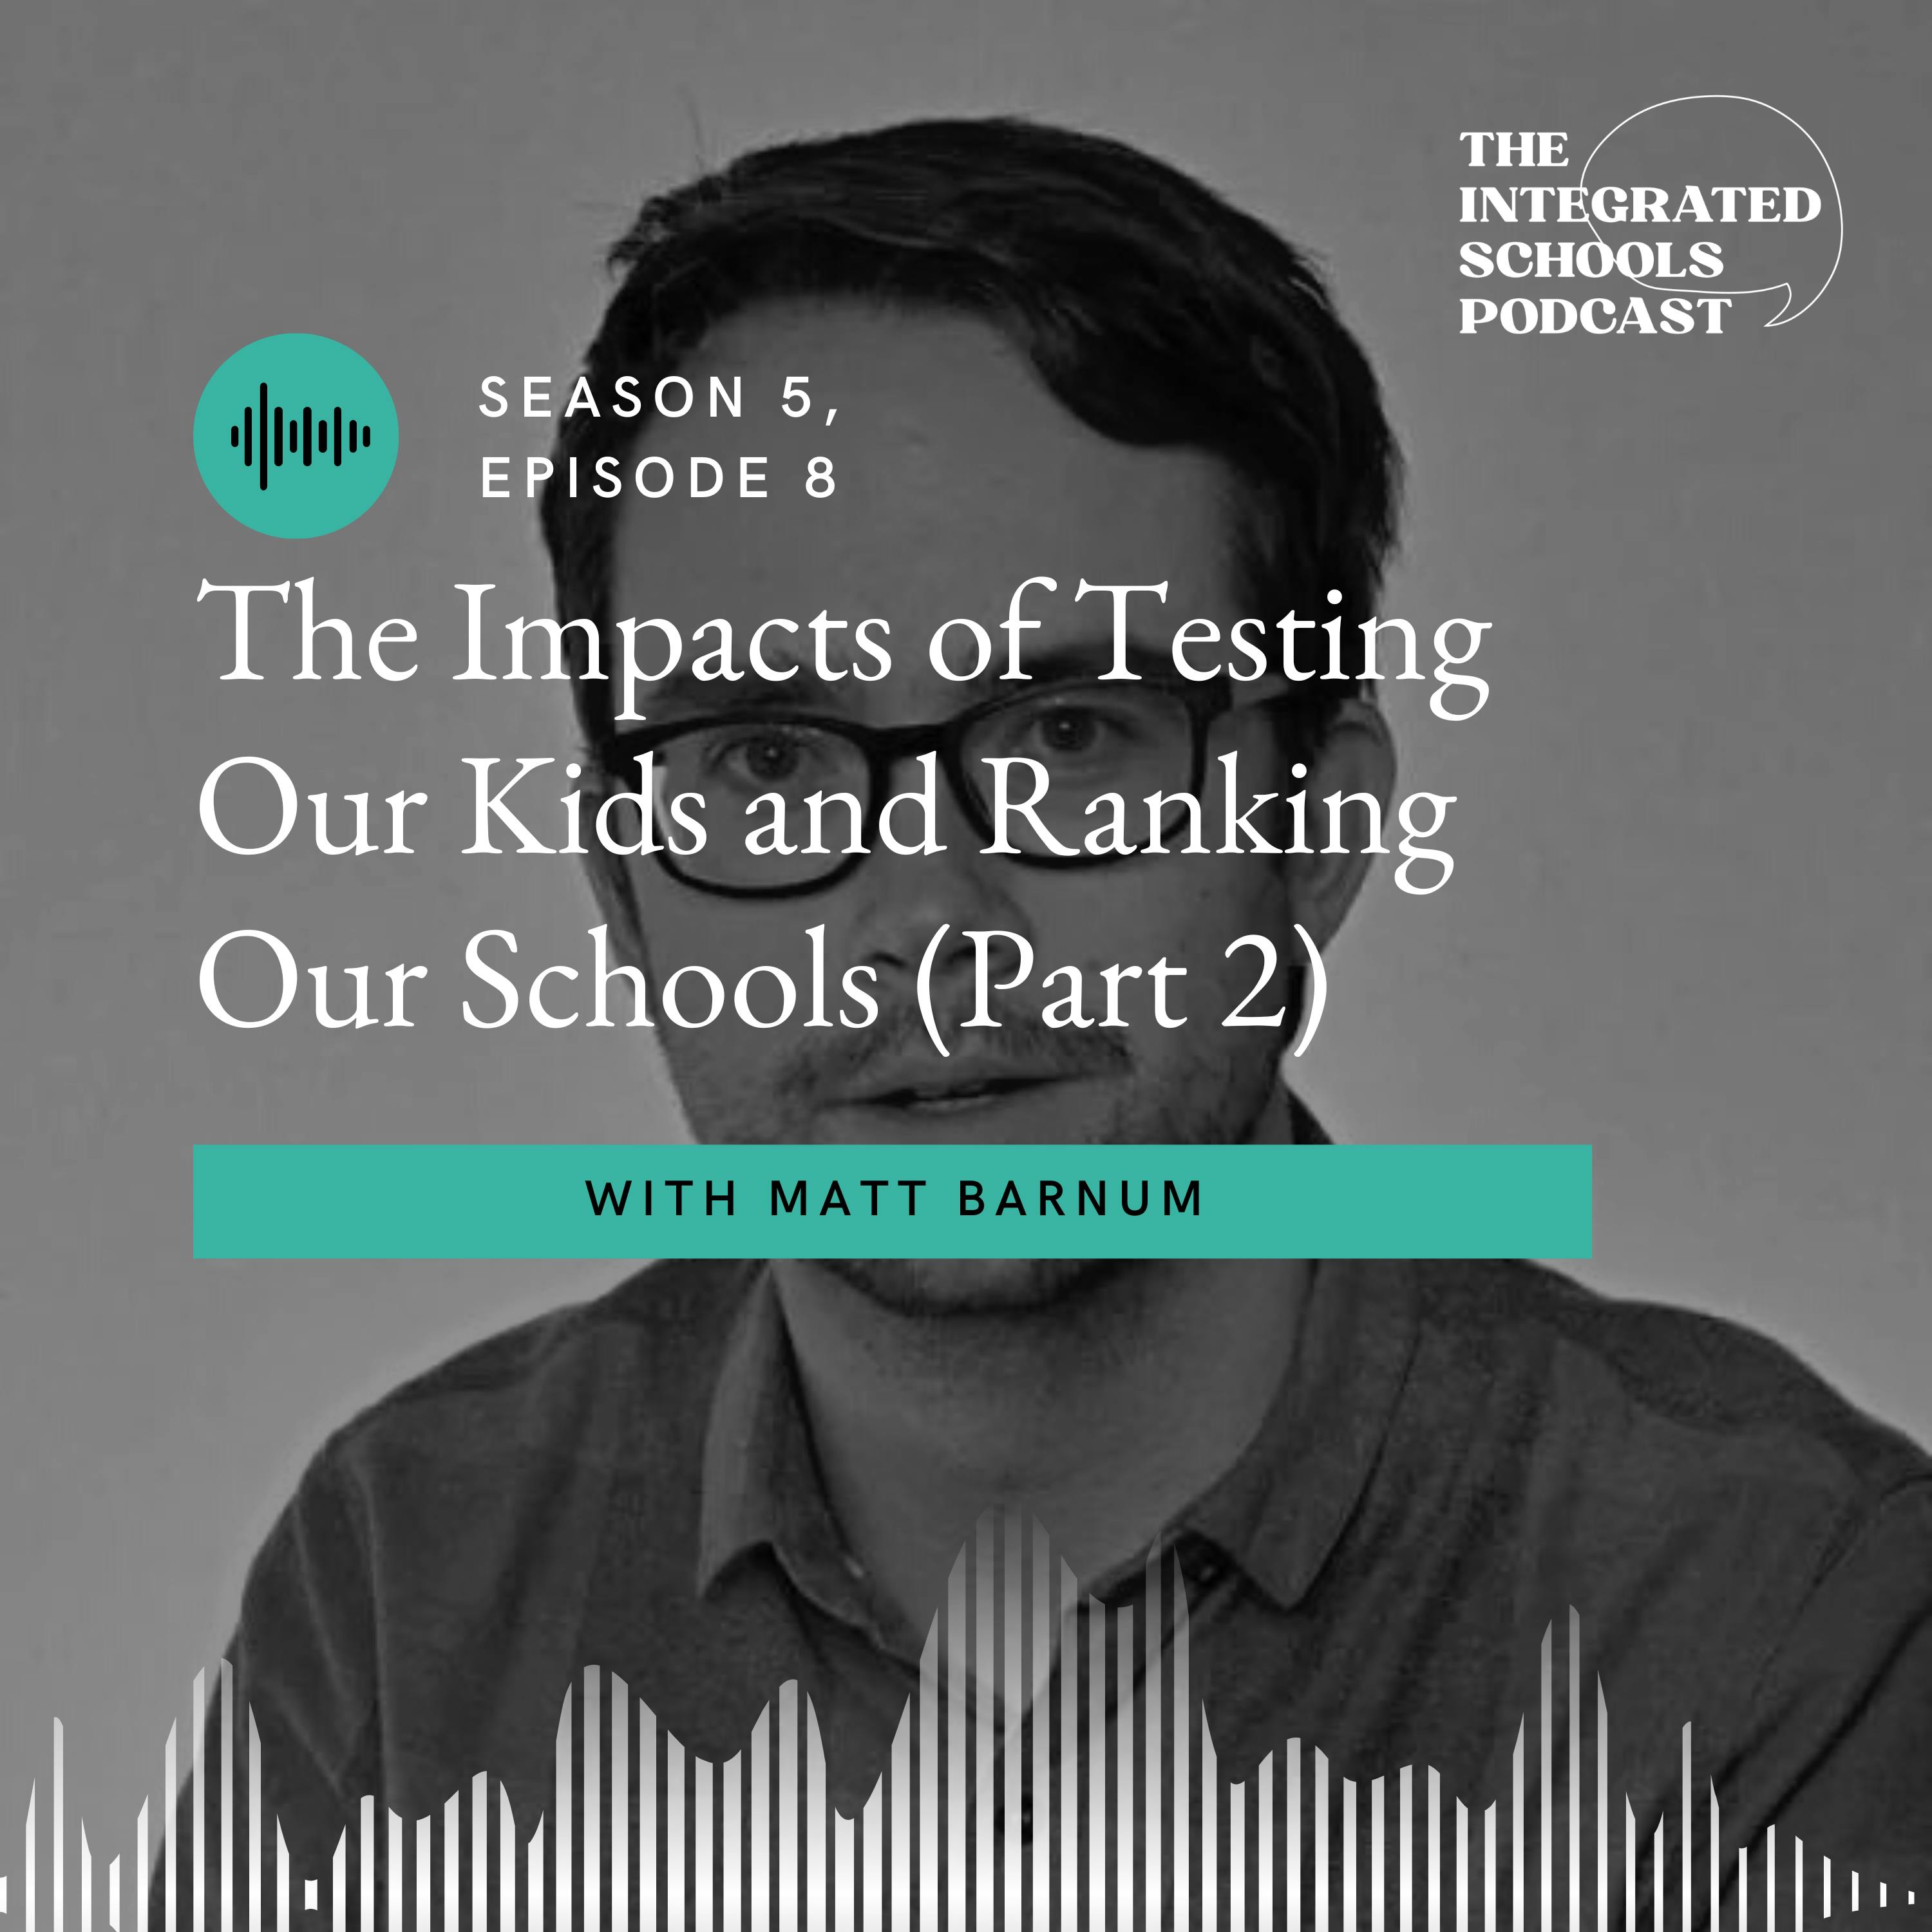 The Impacts of Testing Our Kids and Ranking Our Schools (Part 2)